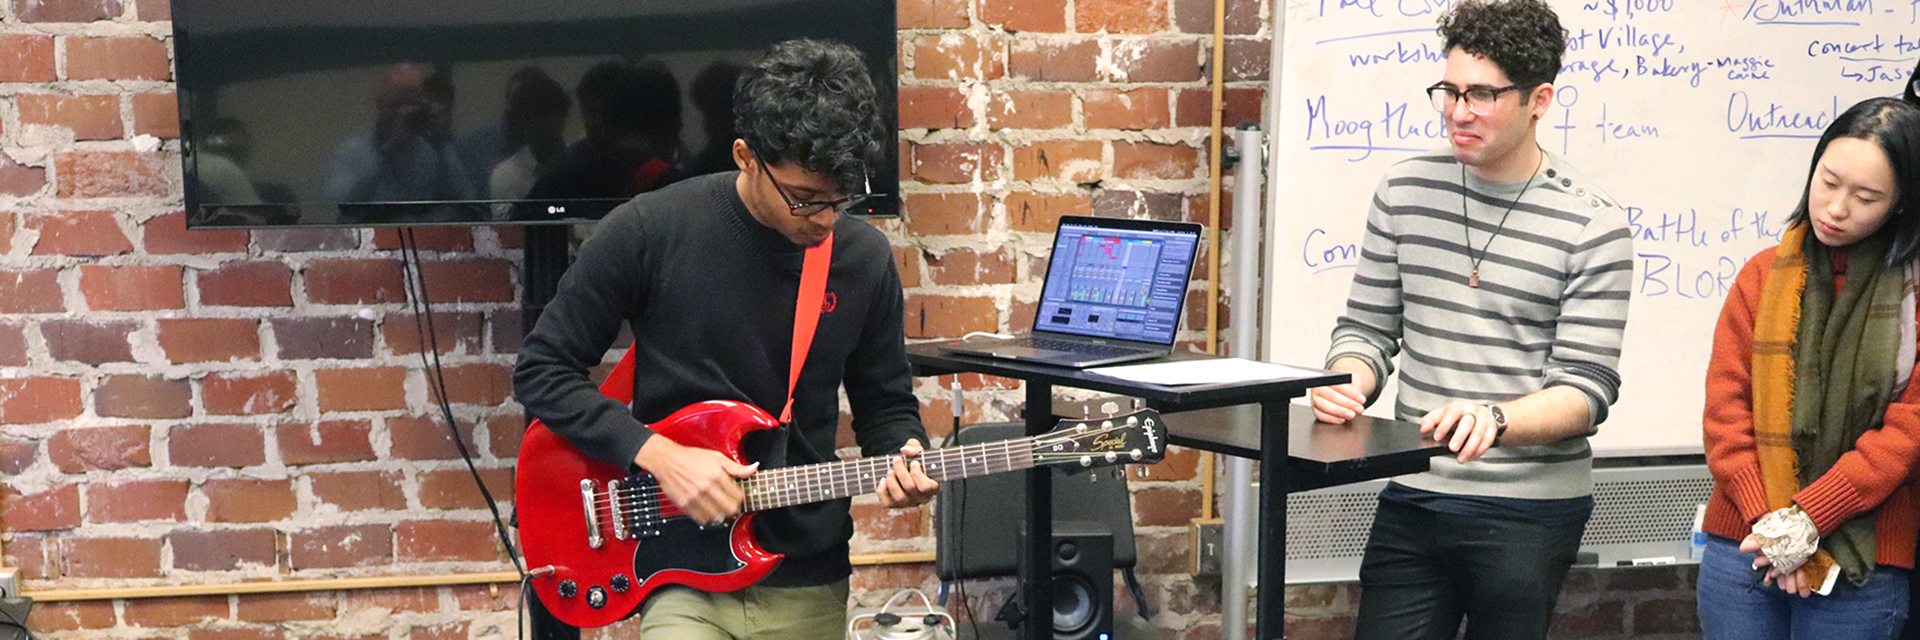 A student plays the guitar as part of a project presentation.